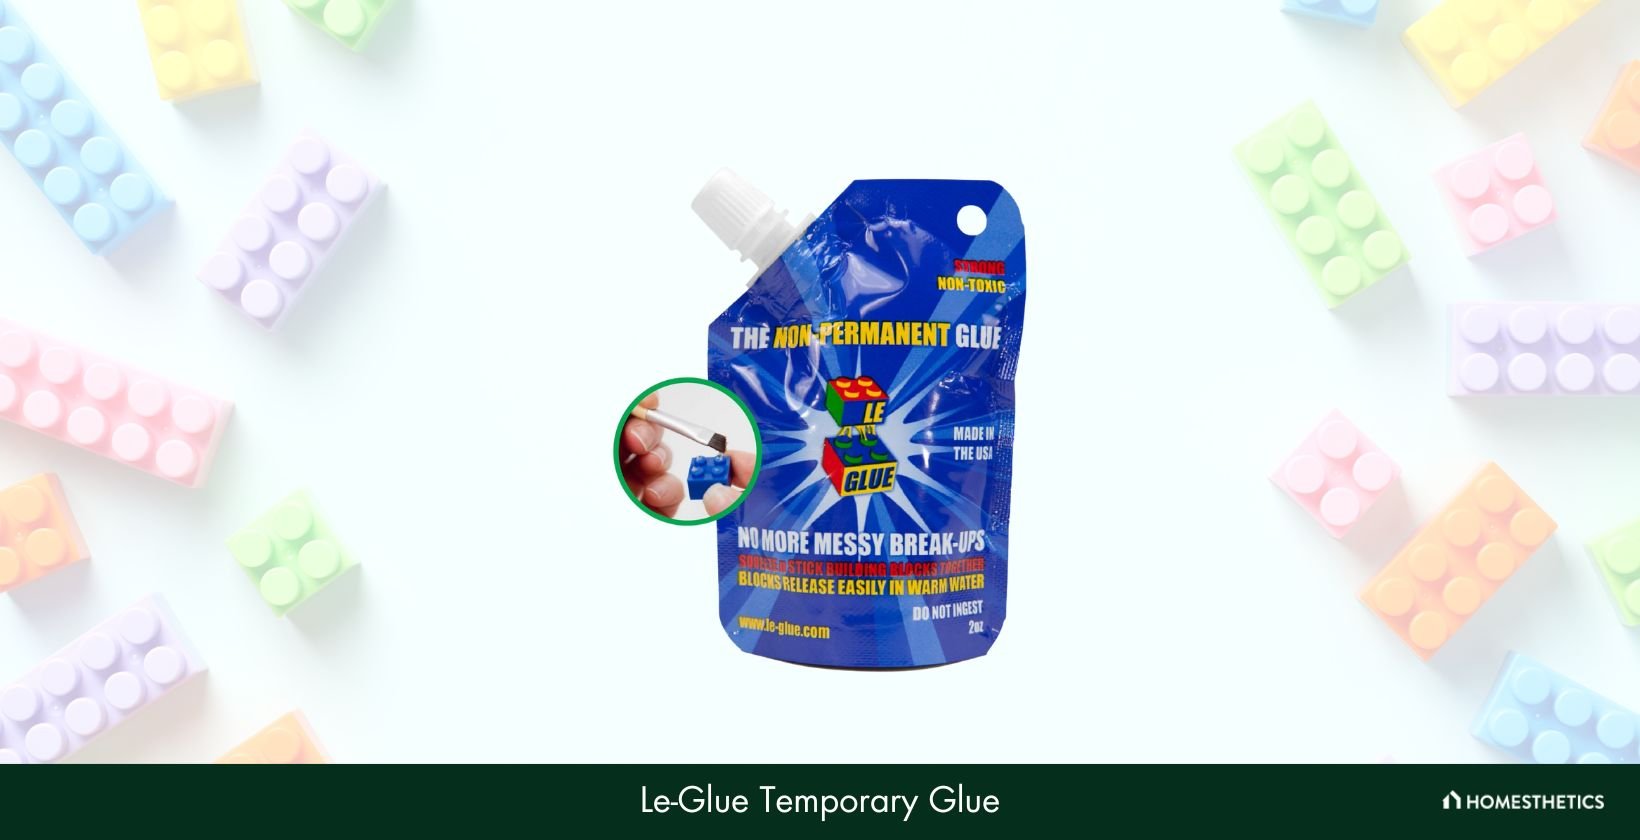 Best Glue for Legos – Glue Reviews – Best Glue for Legos, Crafts and much  more at Glue Nerd